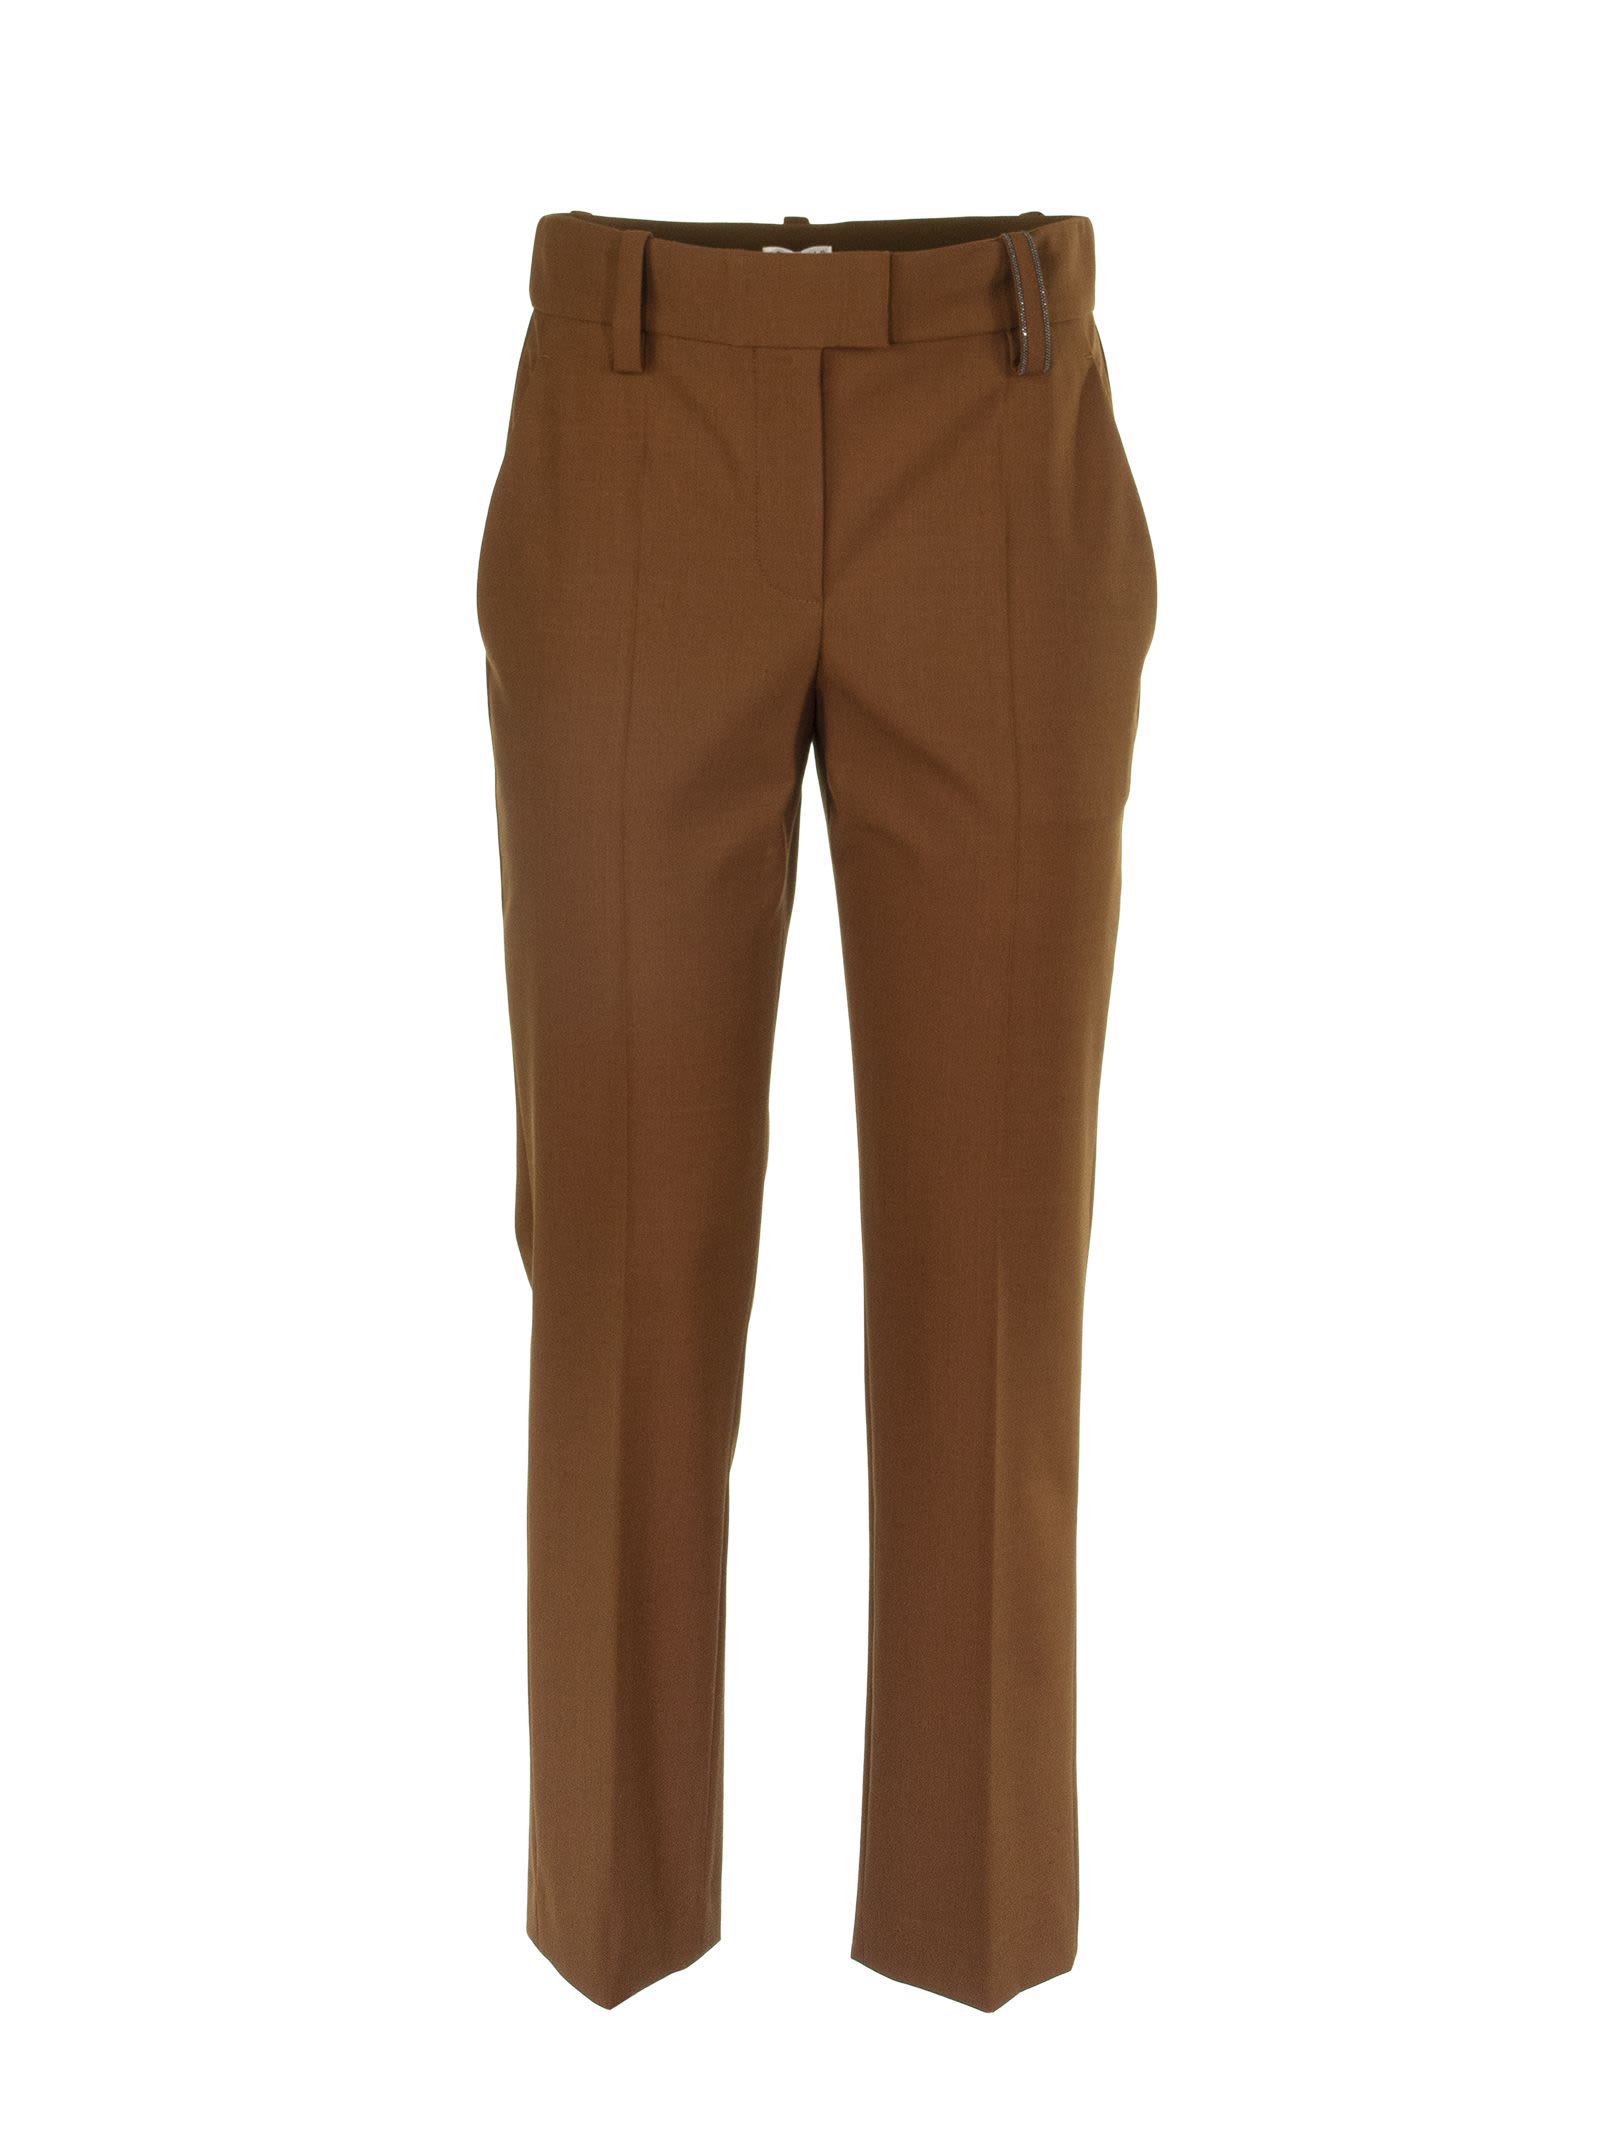 BRUNELLO CUCINELLI TECHNO VIRGIN WOOL HIGH-WAIST CIGARETTE TROUSERS WITH SHINY LOOP,MA124P6963 C7477